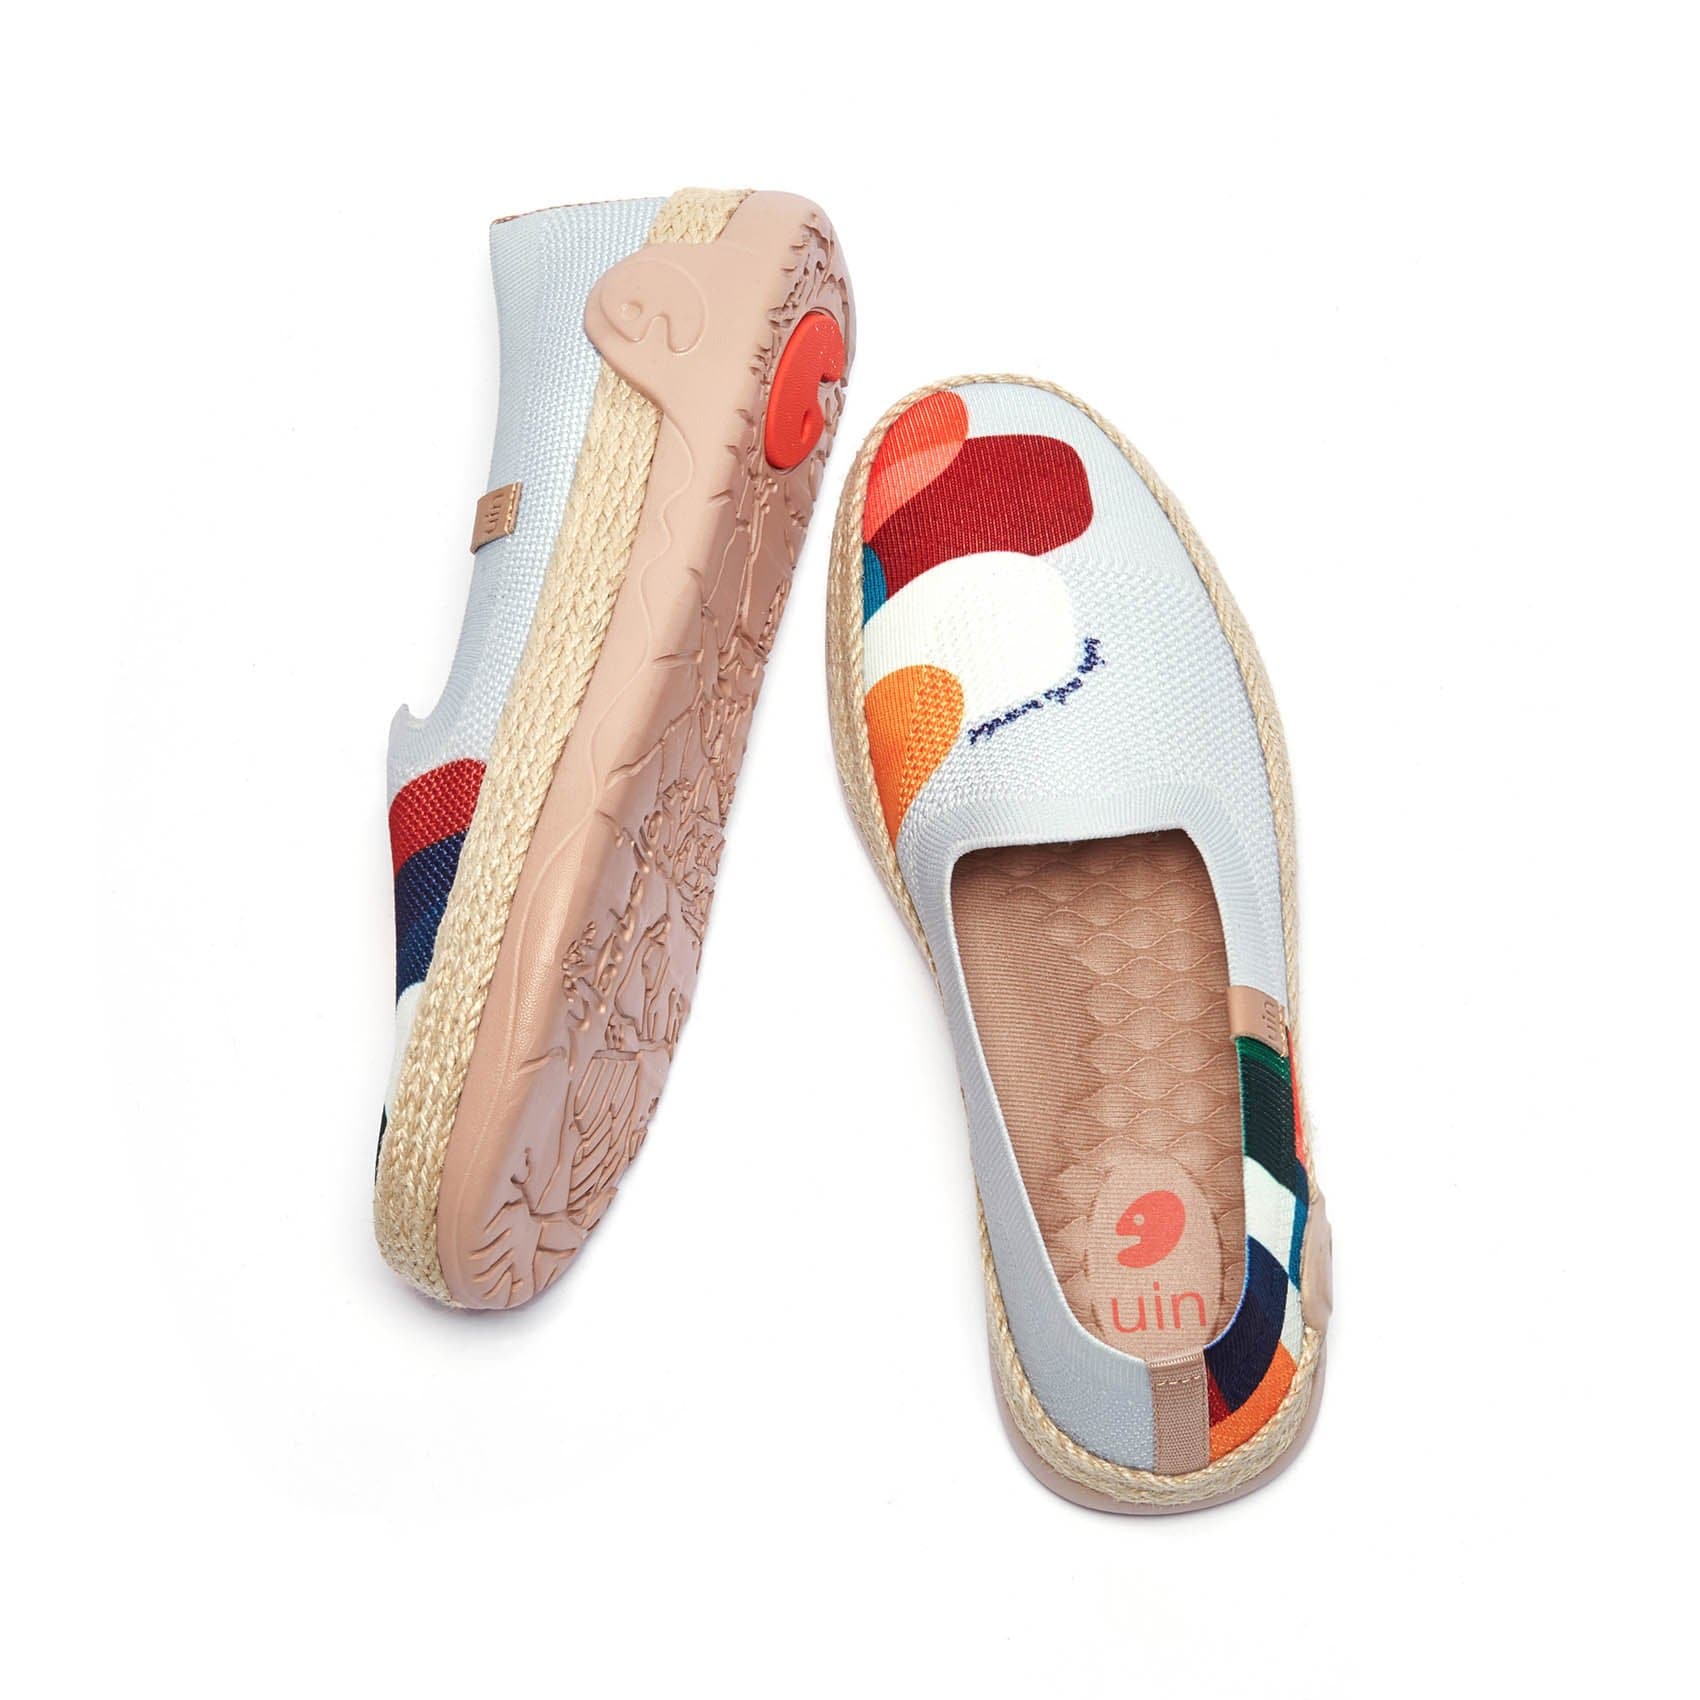 Hold that Color Marbella Women Art Painted Travel Shoes | UIN Footwear ...